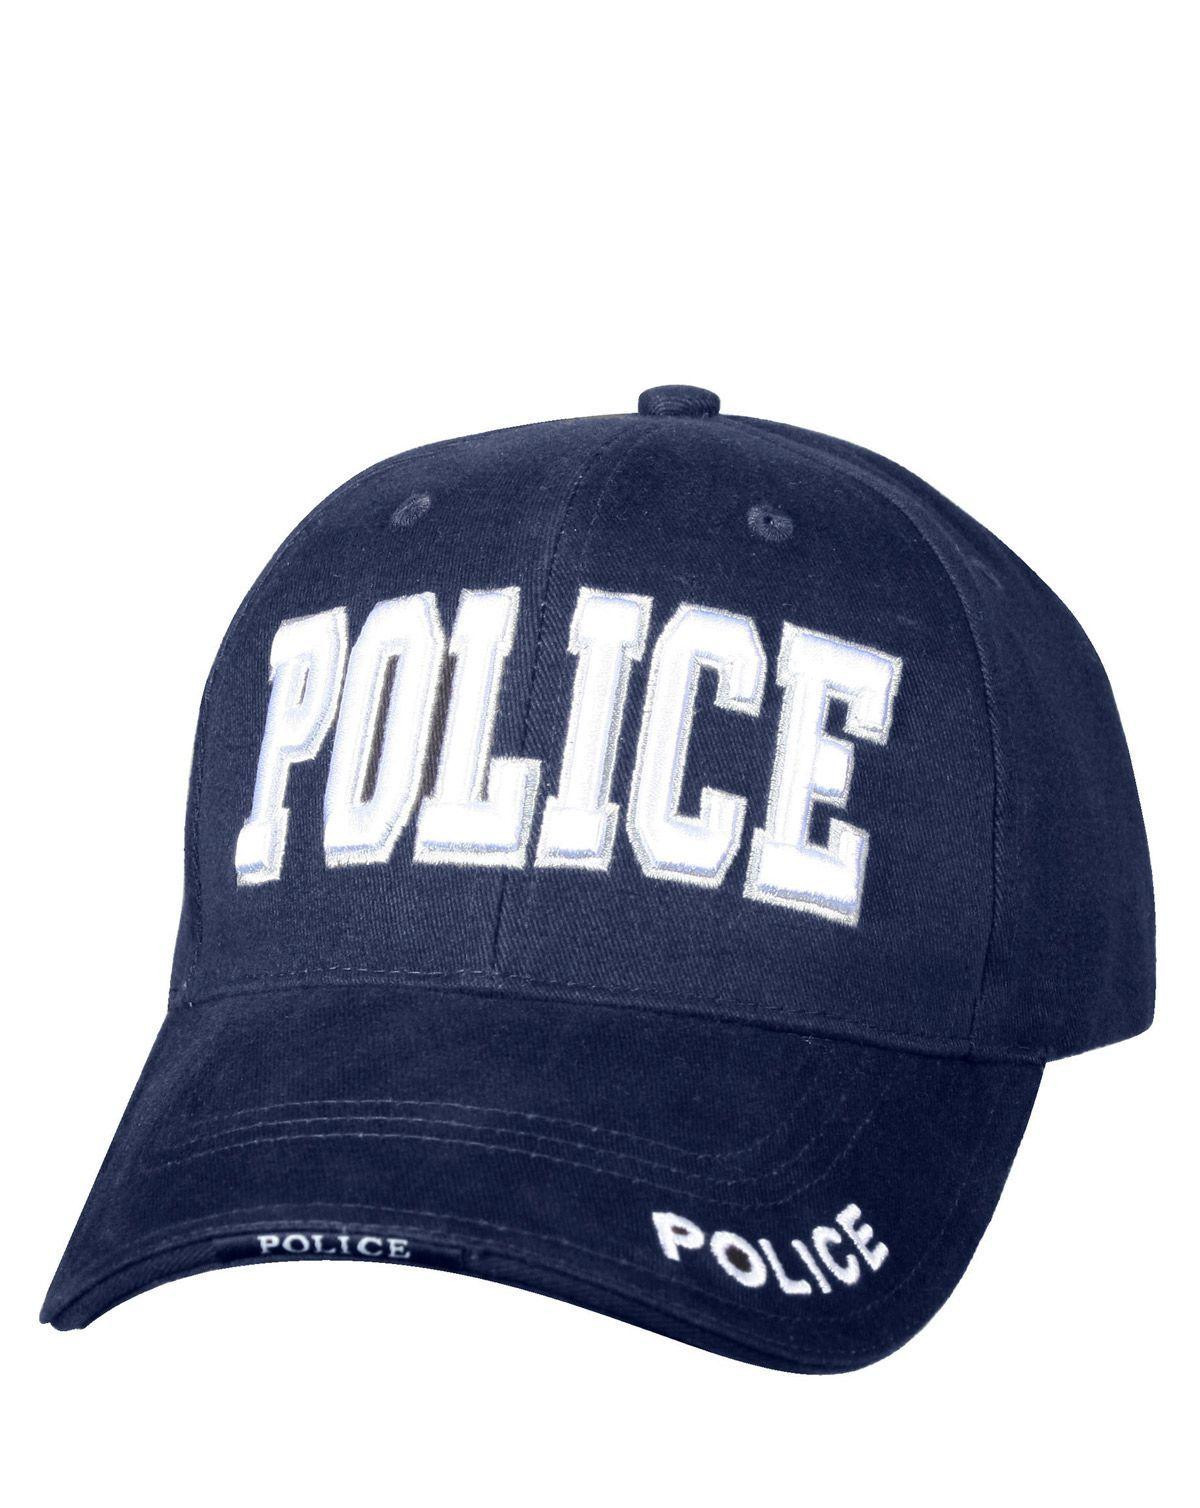 Rothco Broderet Cap - POLICE Style (Navy m. Police, One Size)